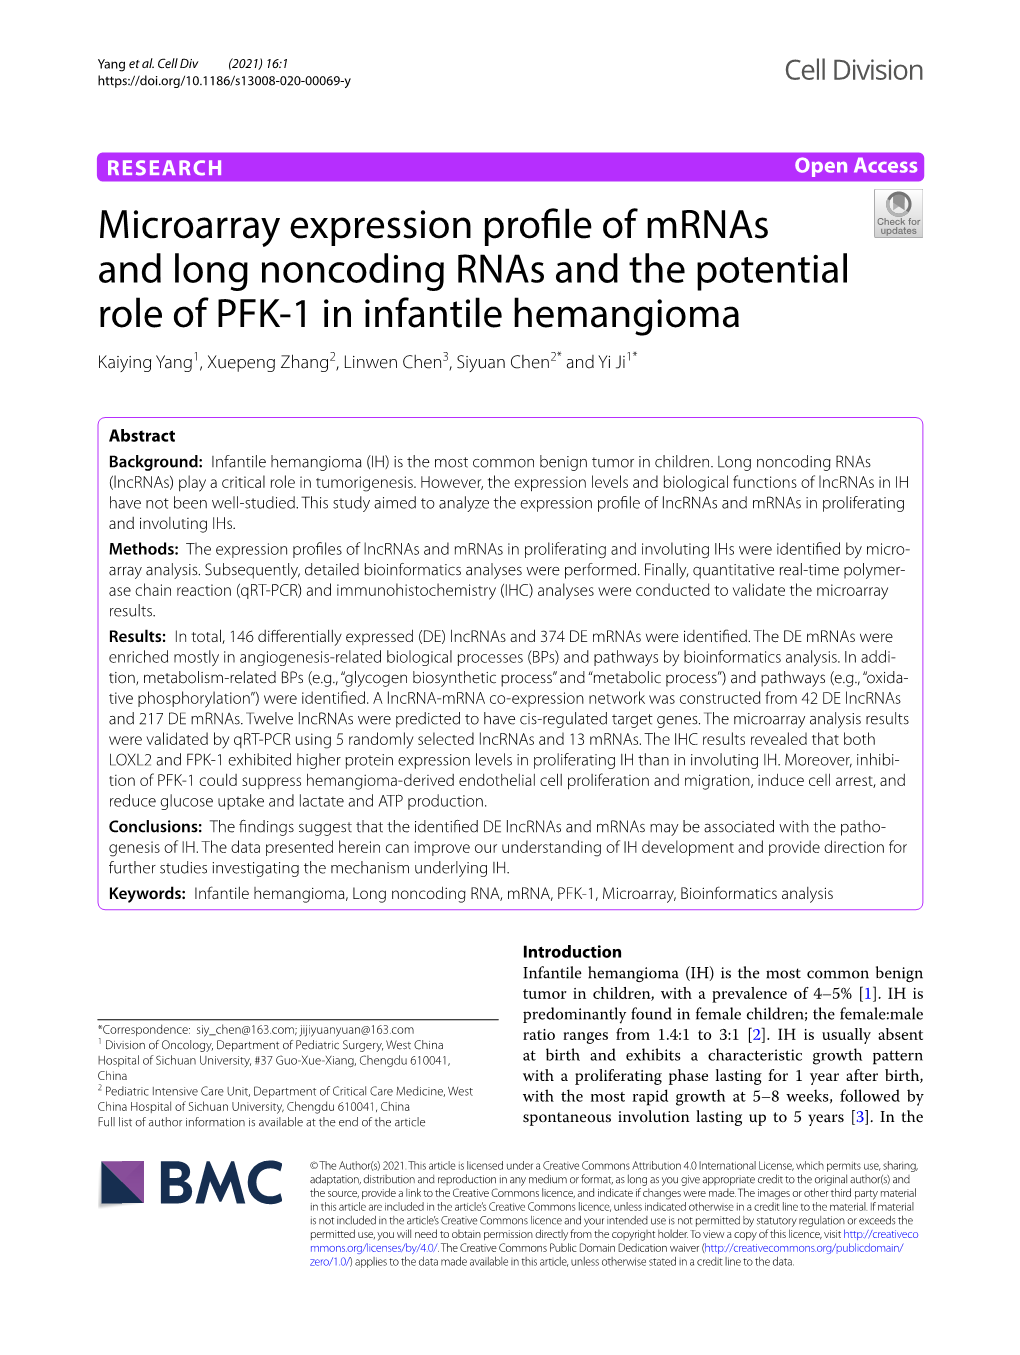 Microarray Expression Profile of Mrnas and Long Noncoding Rnas